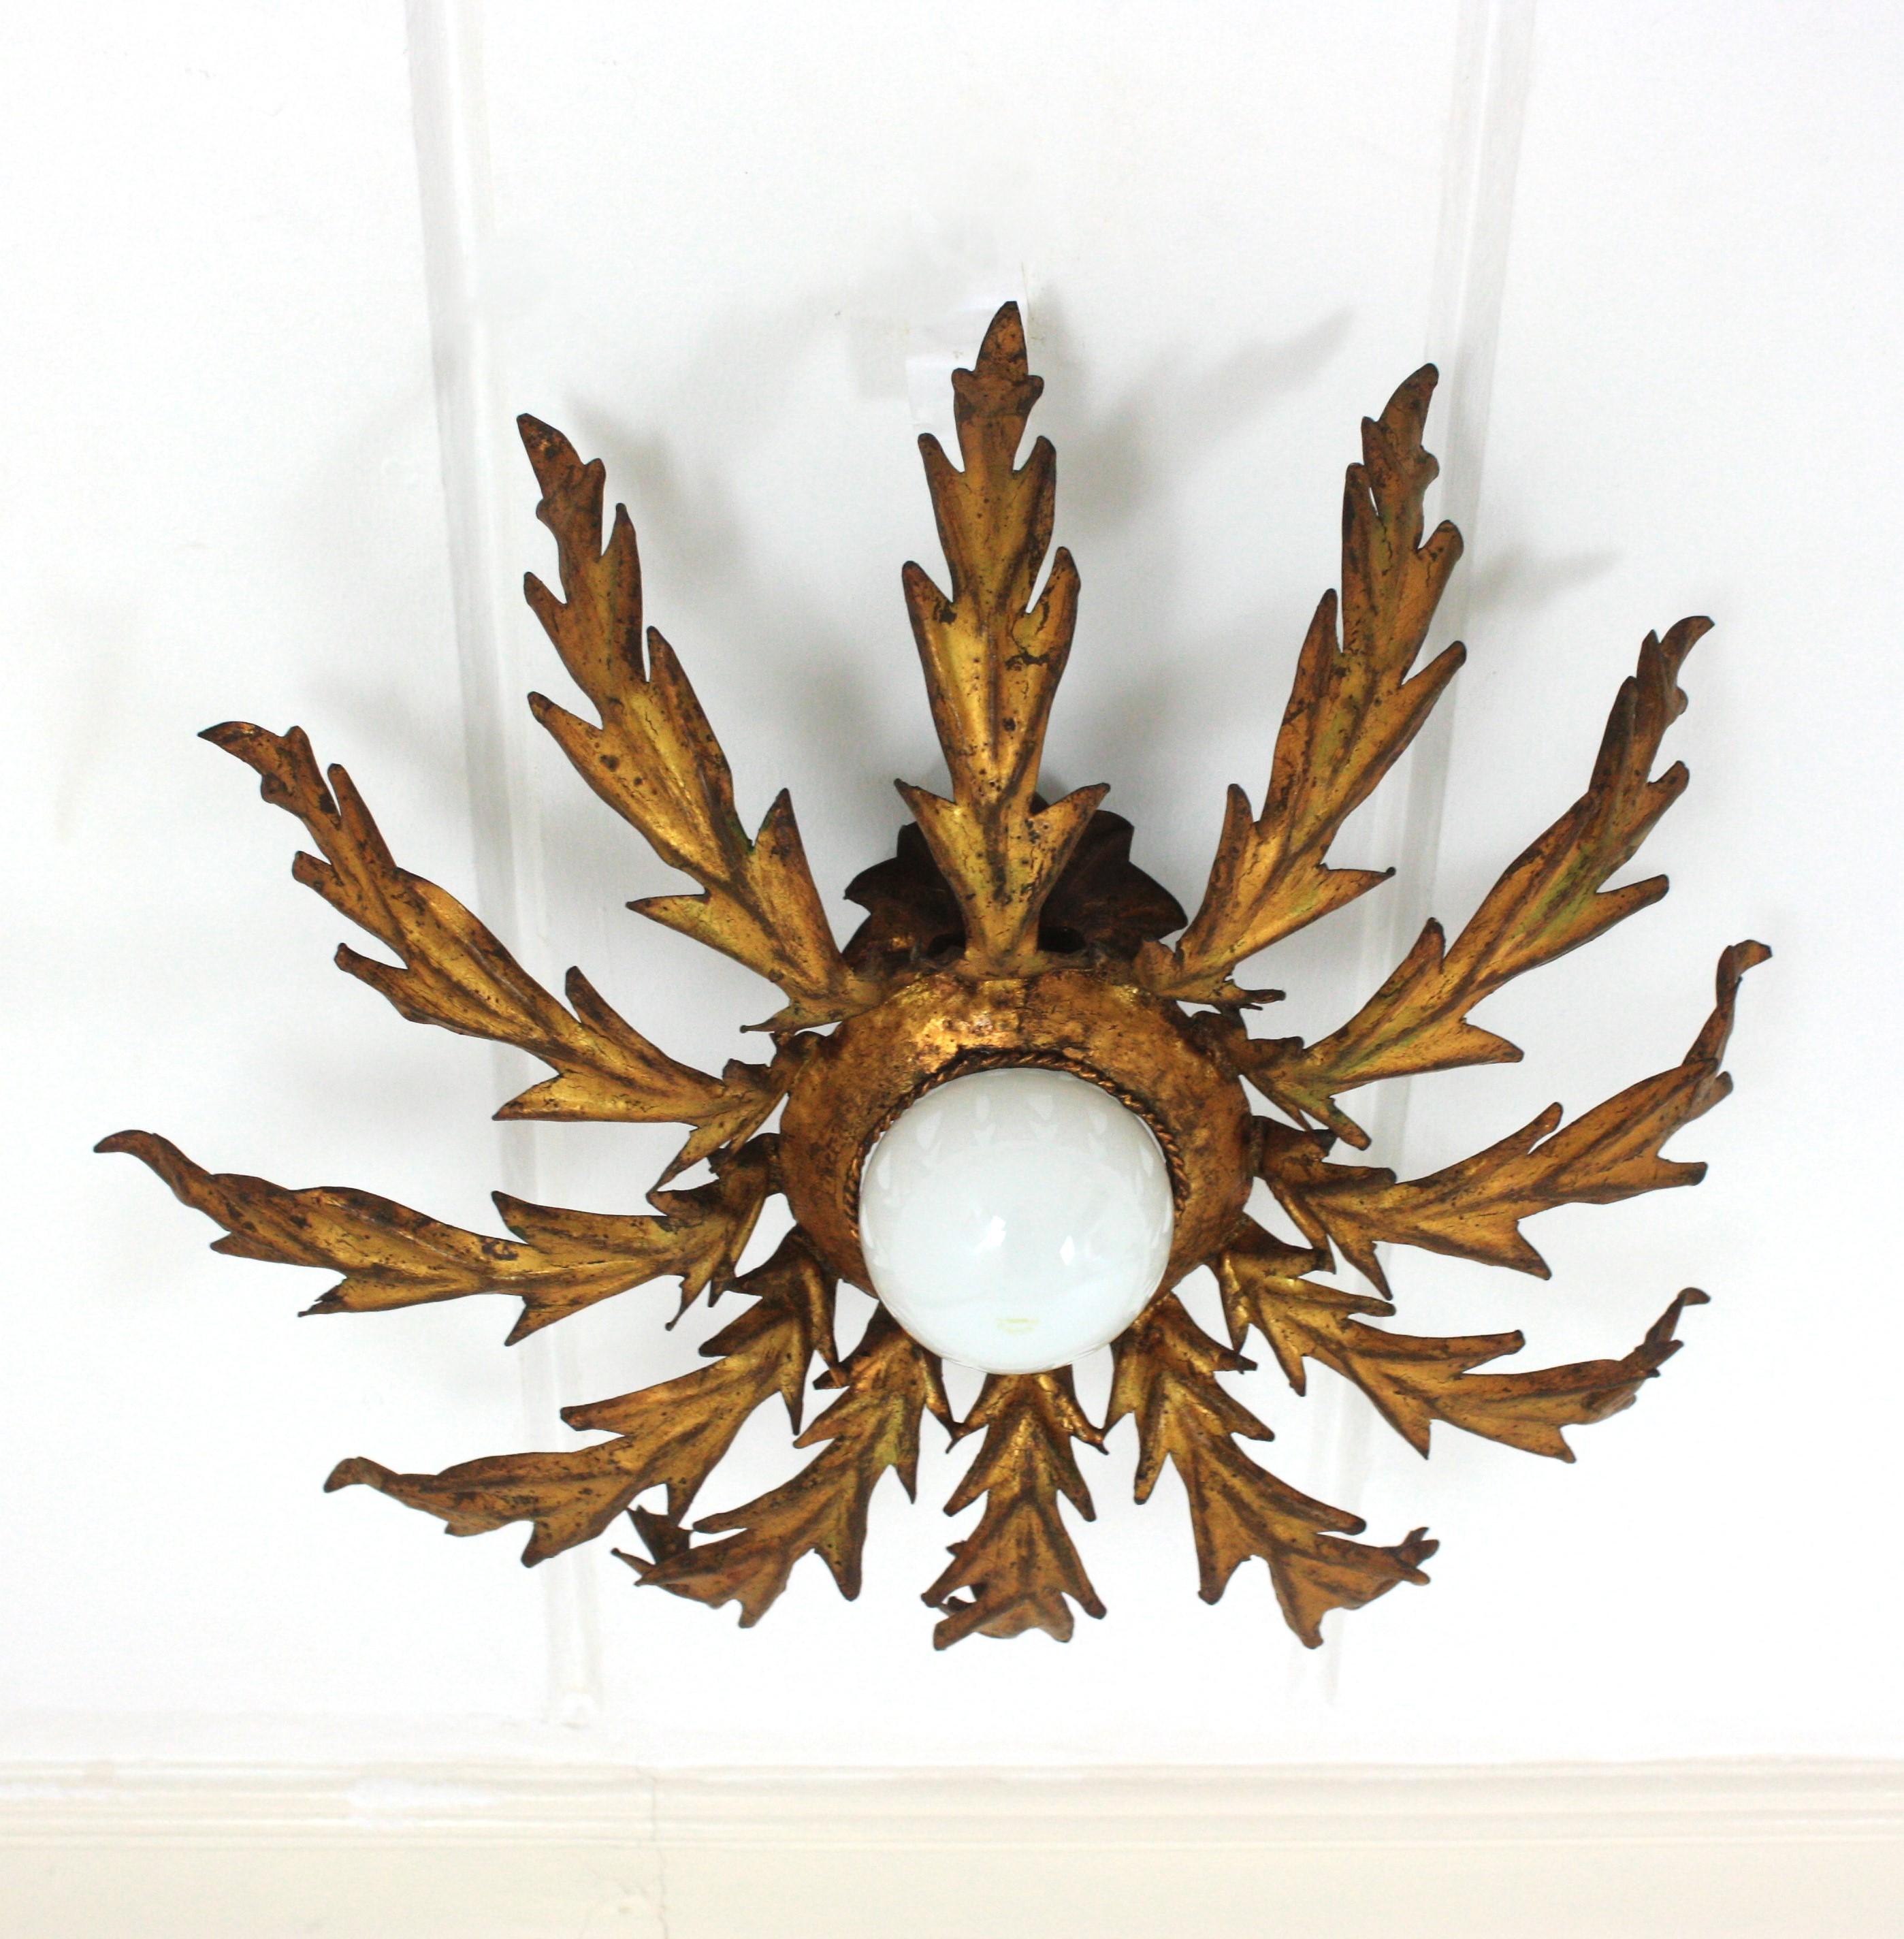 French Sunburst Leafed Ceiling Light Fixture in Gilt Iron, 1940s For Sale 1